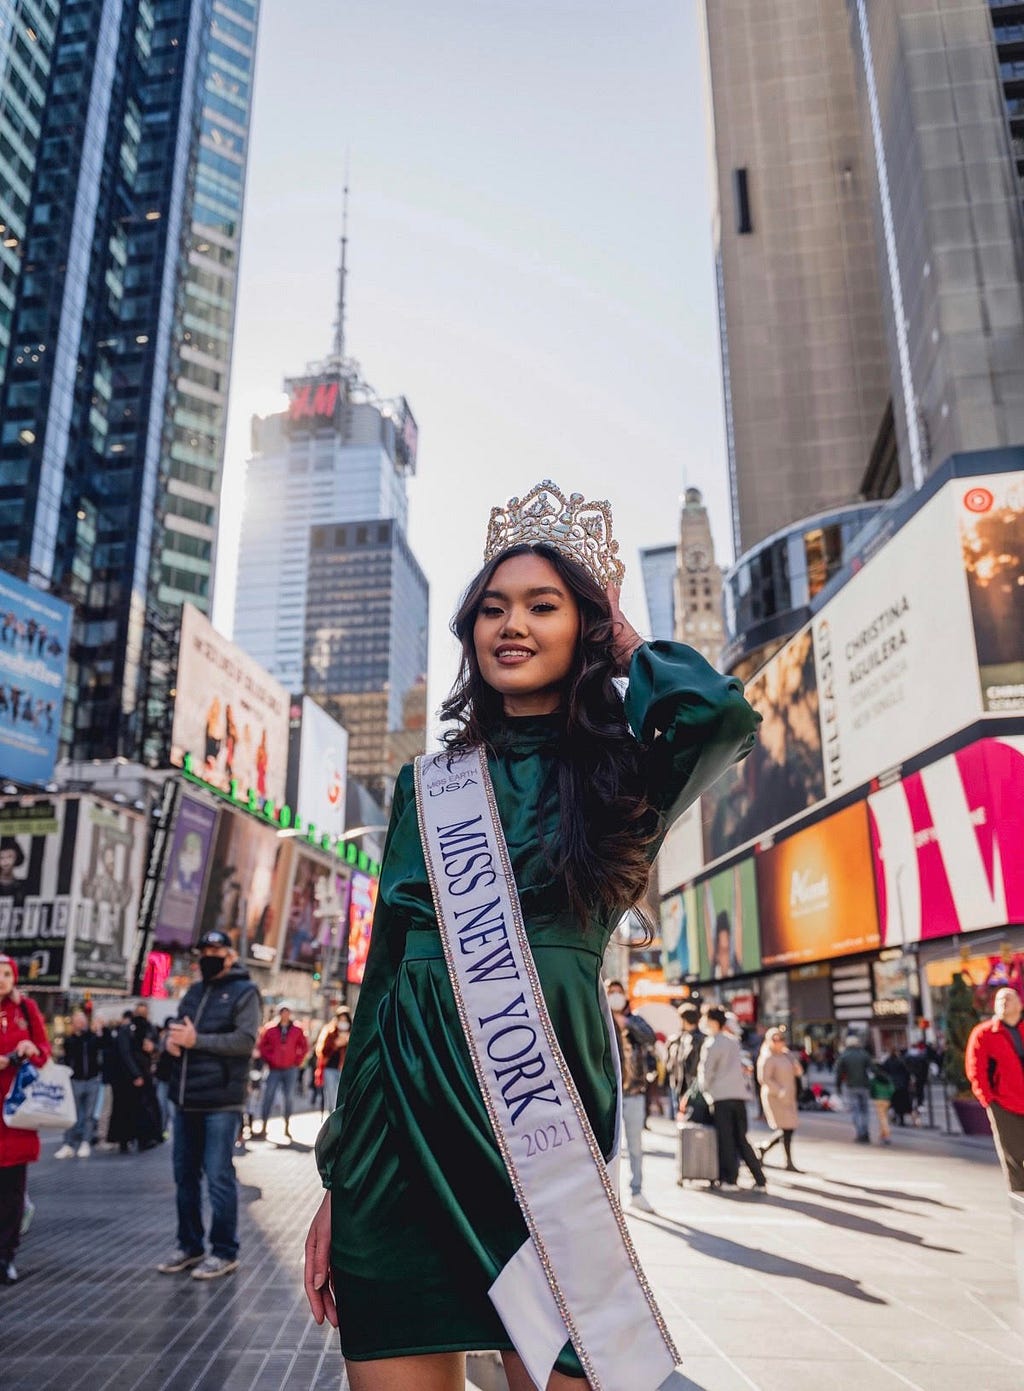 Marizza wearing her “Miss New York 2021” sash in the middle of Times Square, New York City, New York, USA